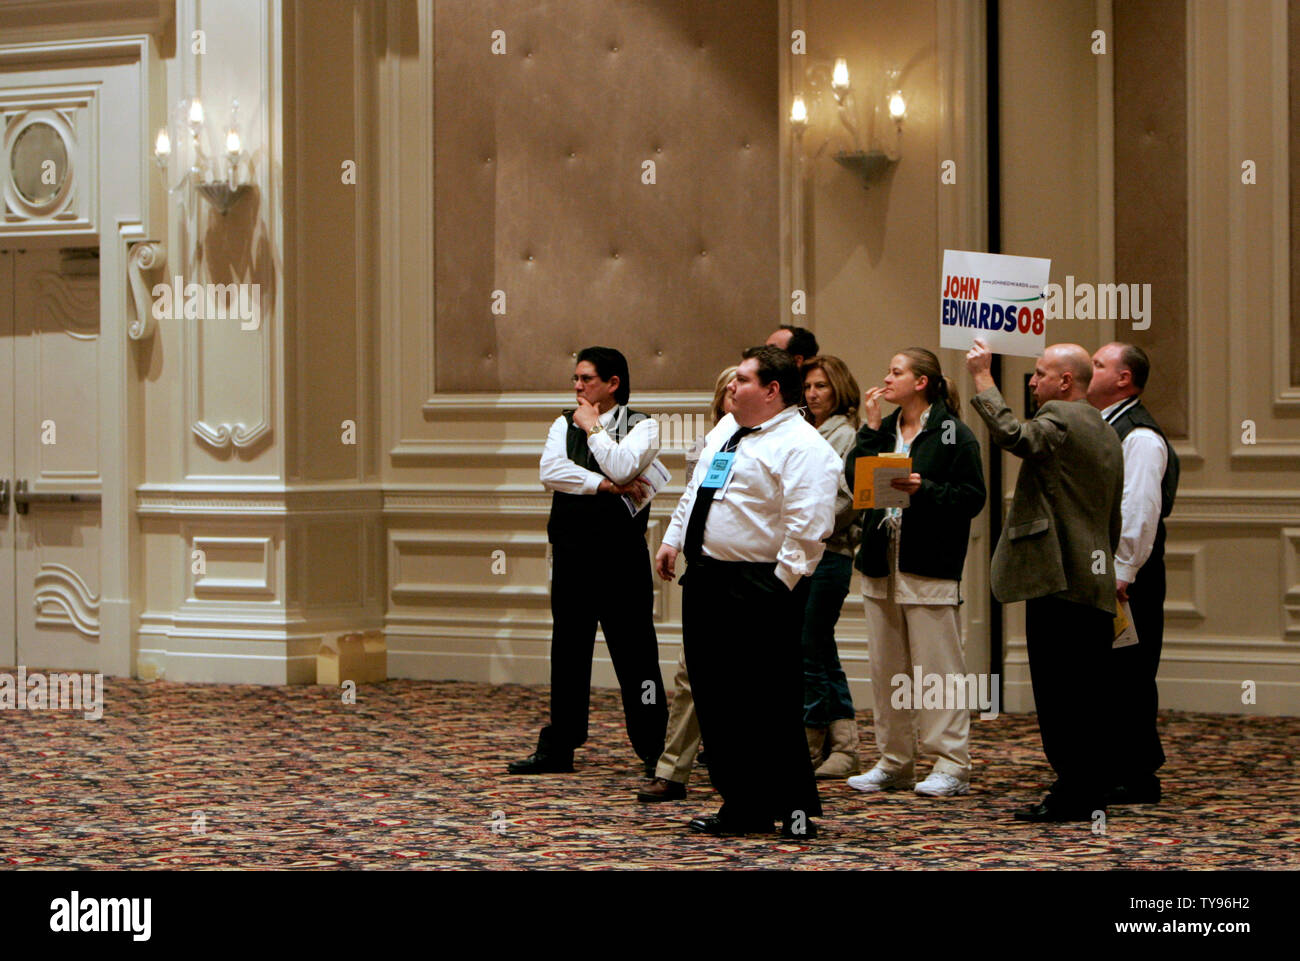 Supporters of Democratic presidential candidate John Edwards gather during the Democratic caucus being held in the Bellagio Hotel on January 19, 2008., in Las Vegas. Edwards finished a distant third behind candidates Barack Obama (D-IL) and Hillary Clinton (D-N.Y.). (UPI Photo/Mark Cowan) Stock Photo